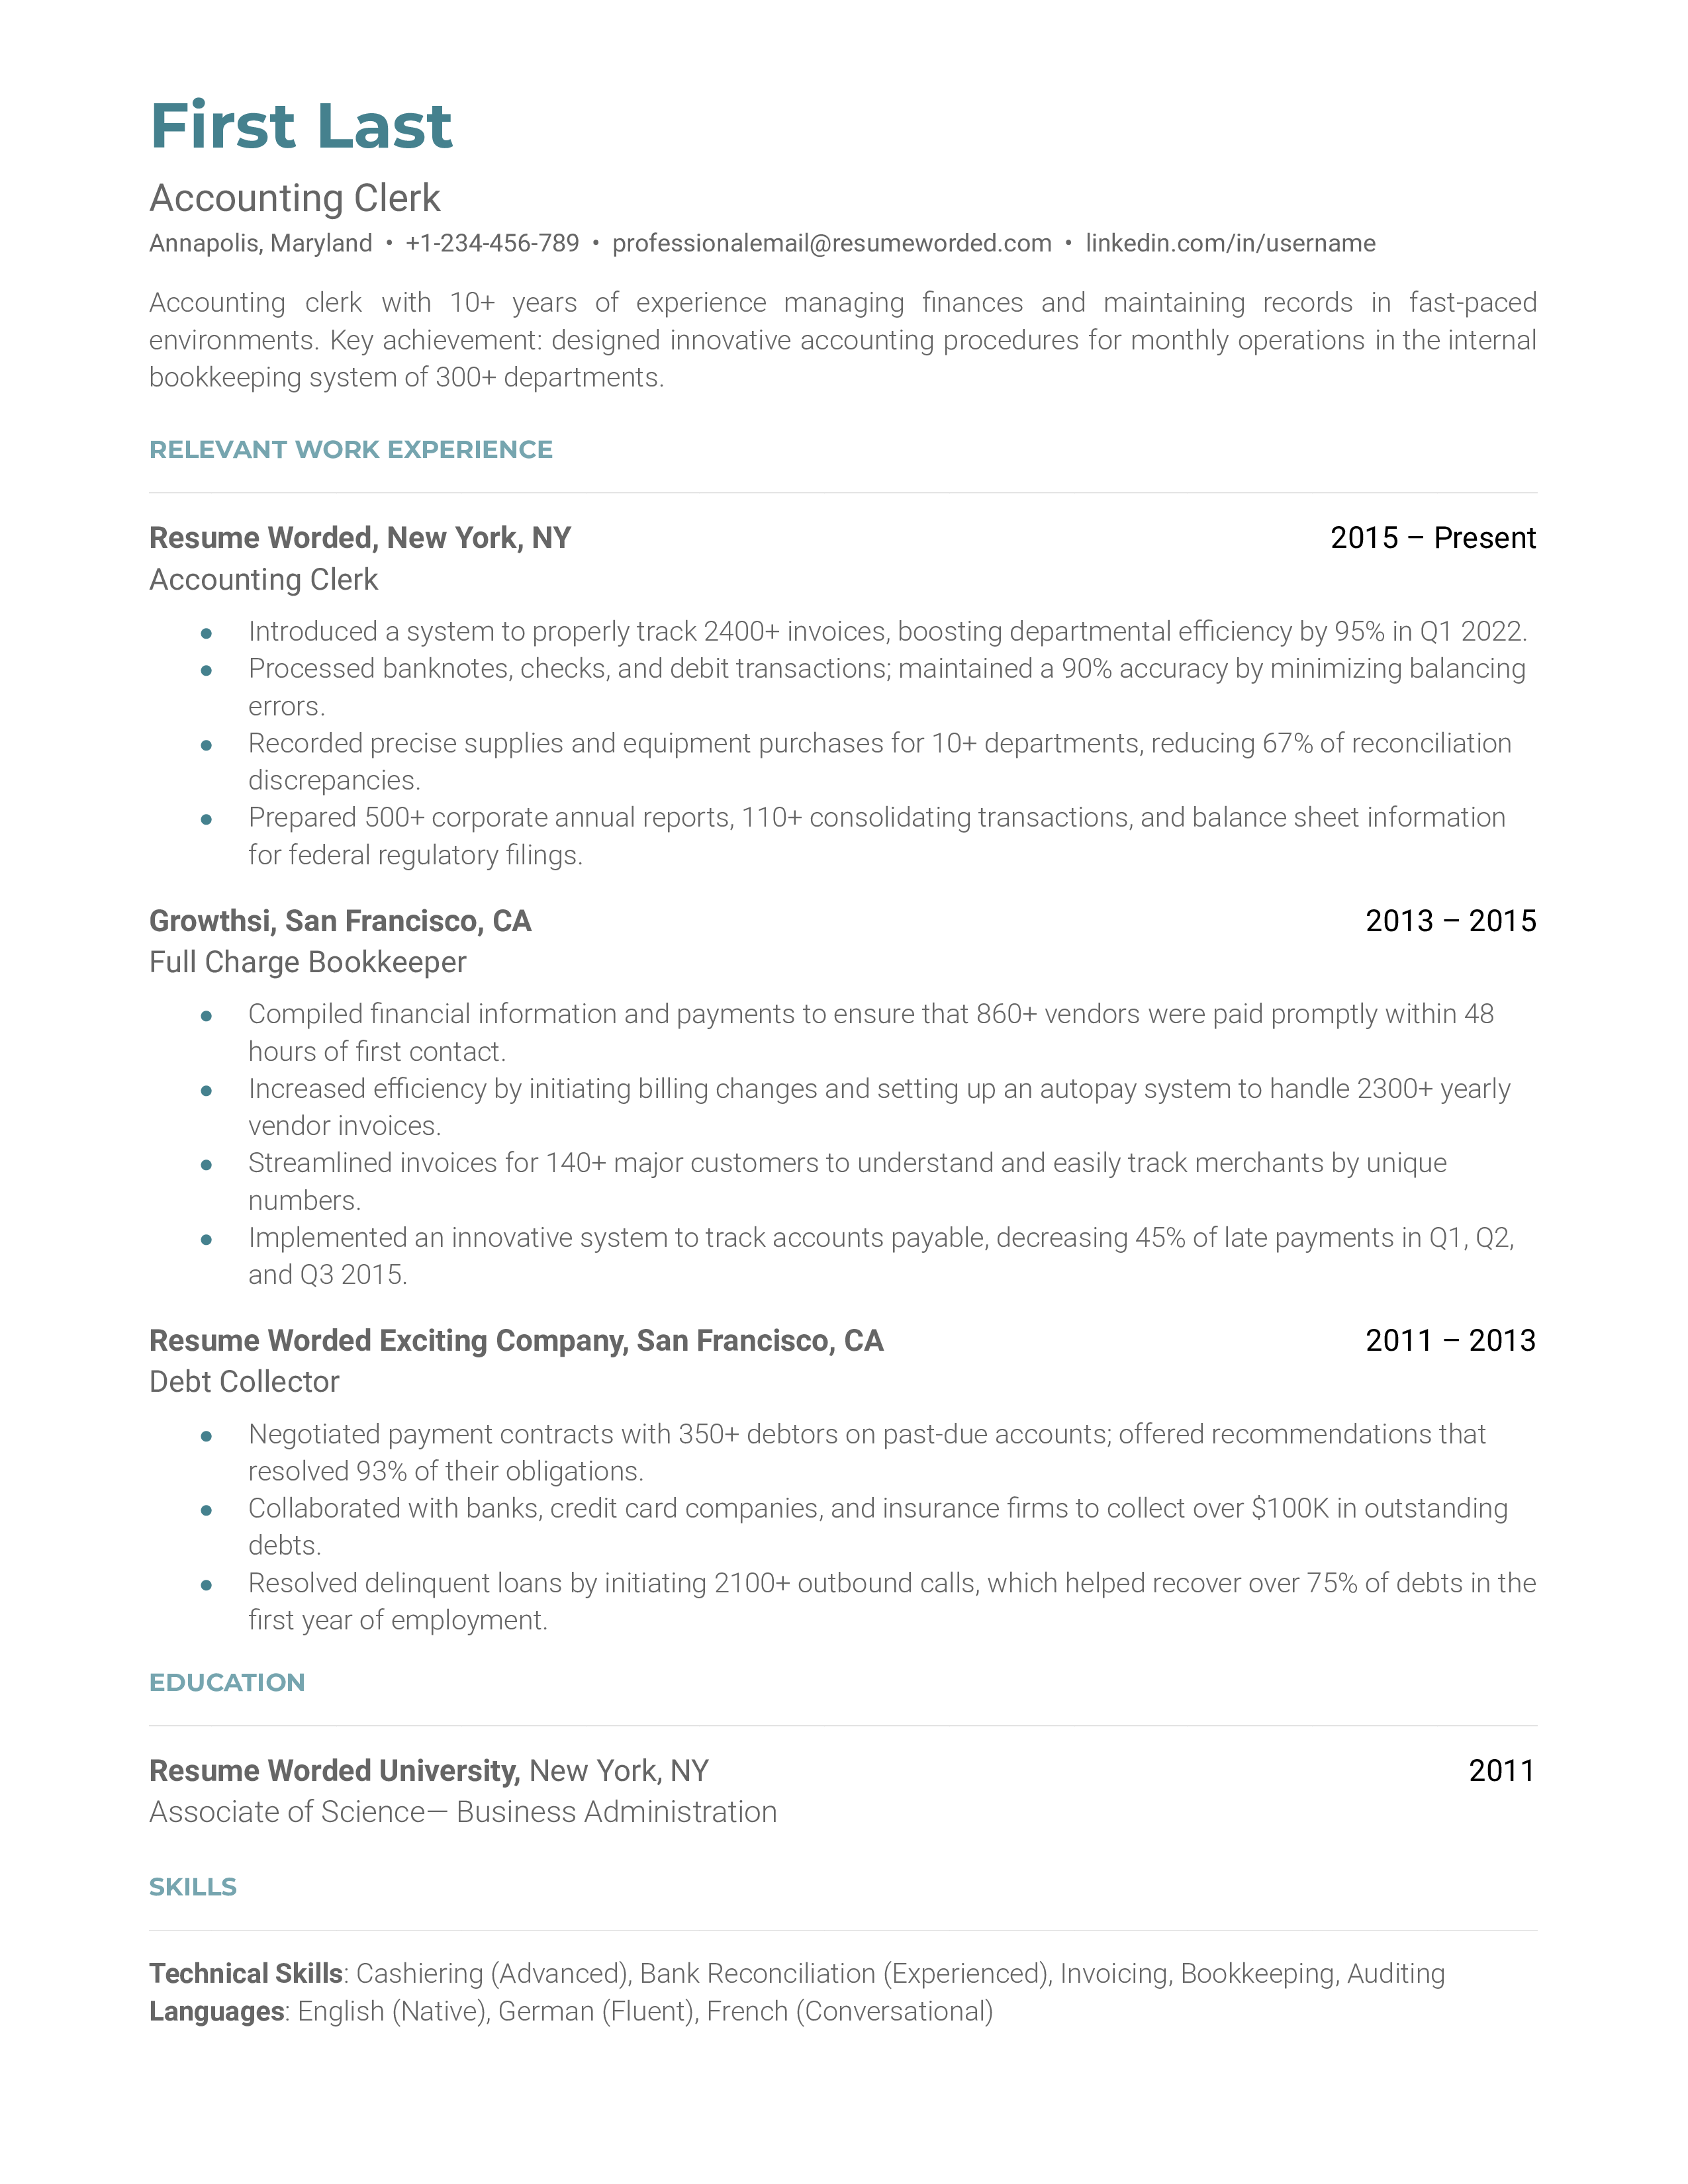 A CV sample for an Accounting Clerk role focusing on software skills and relevant financial tasks.